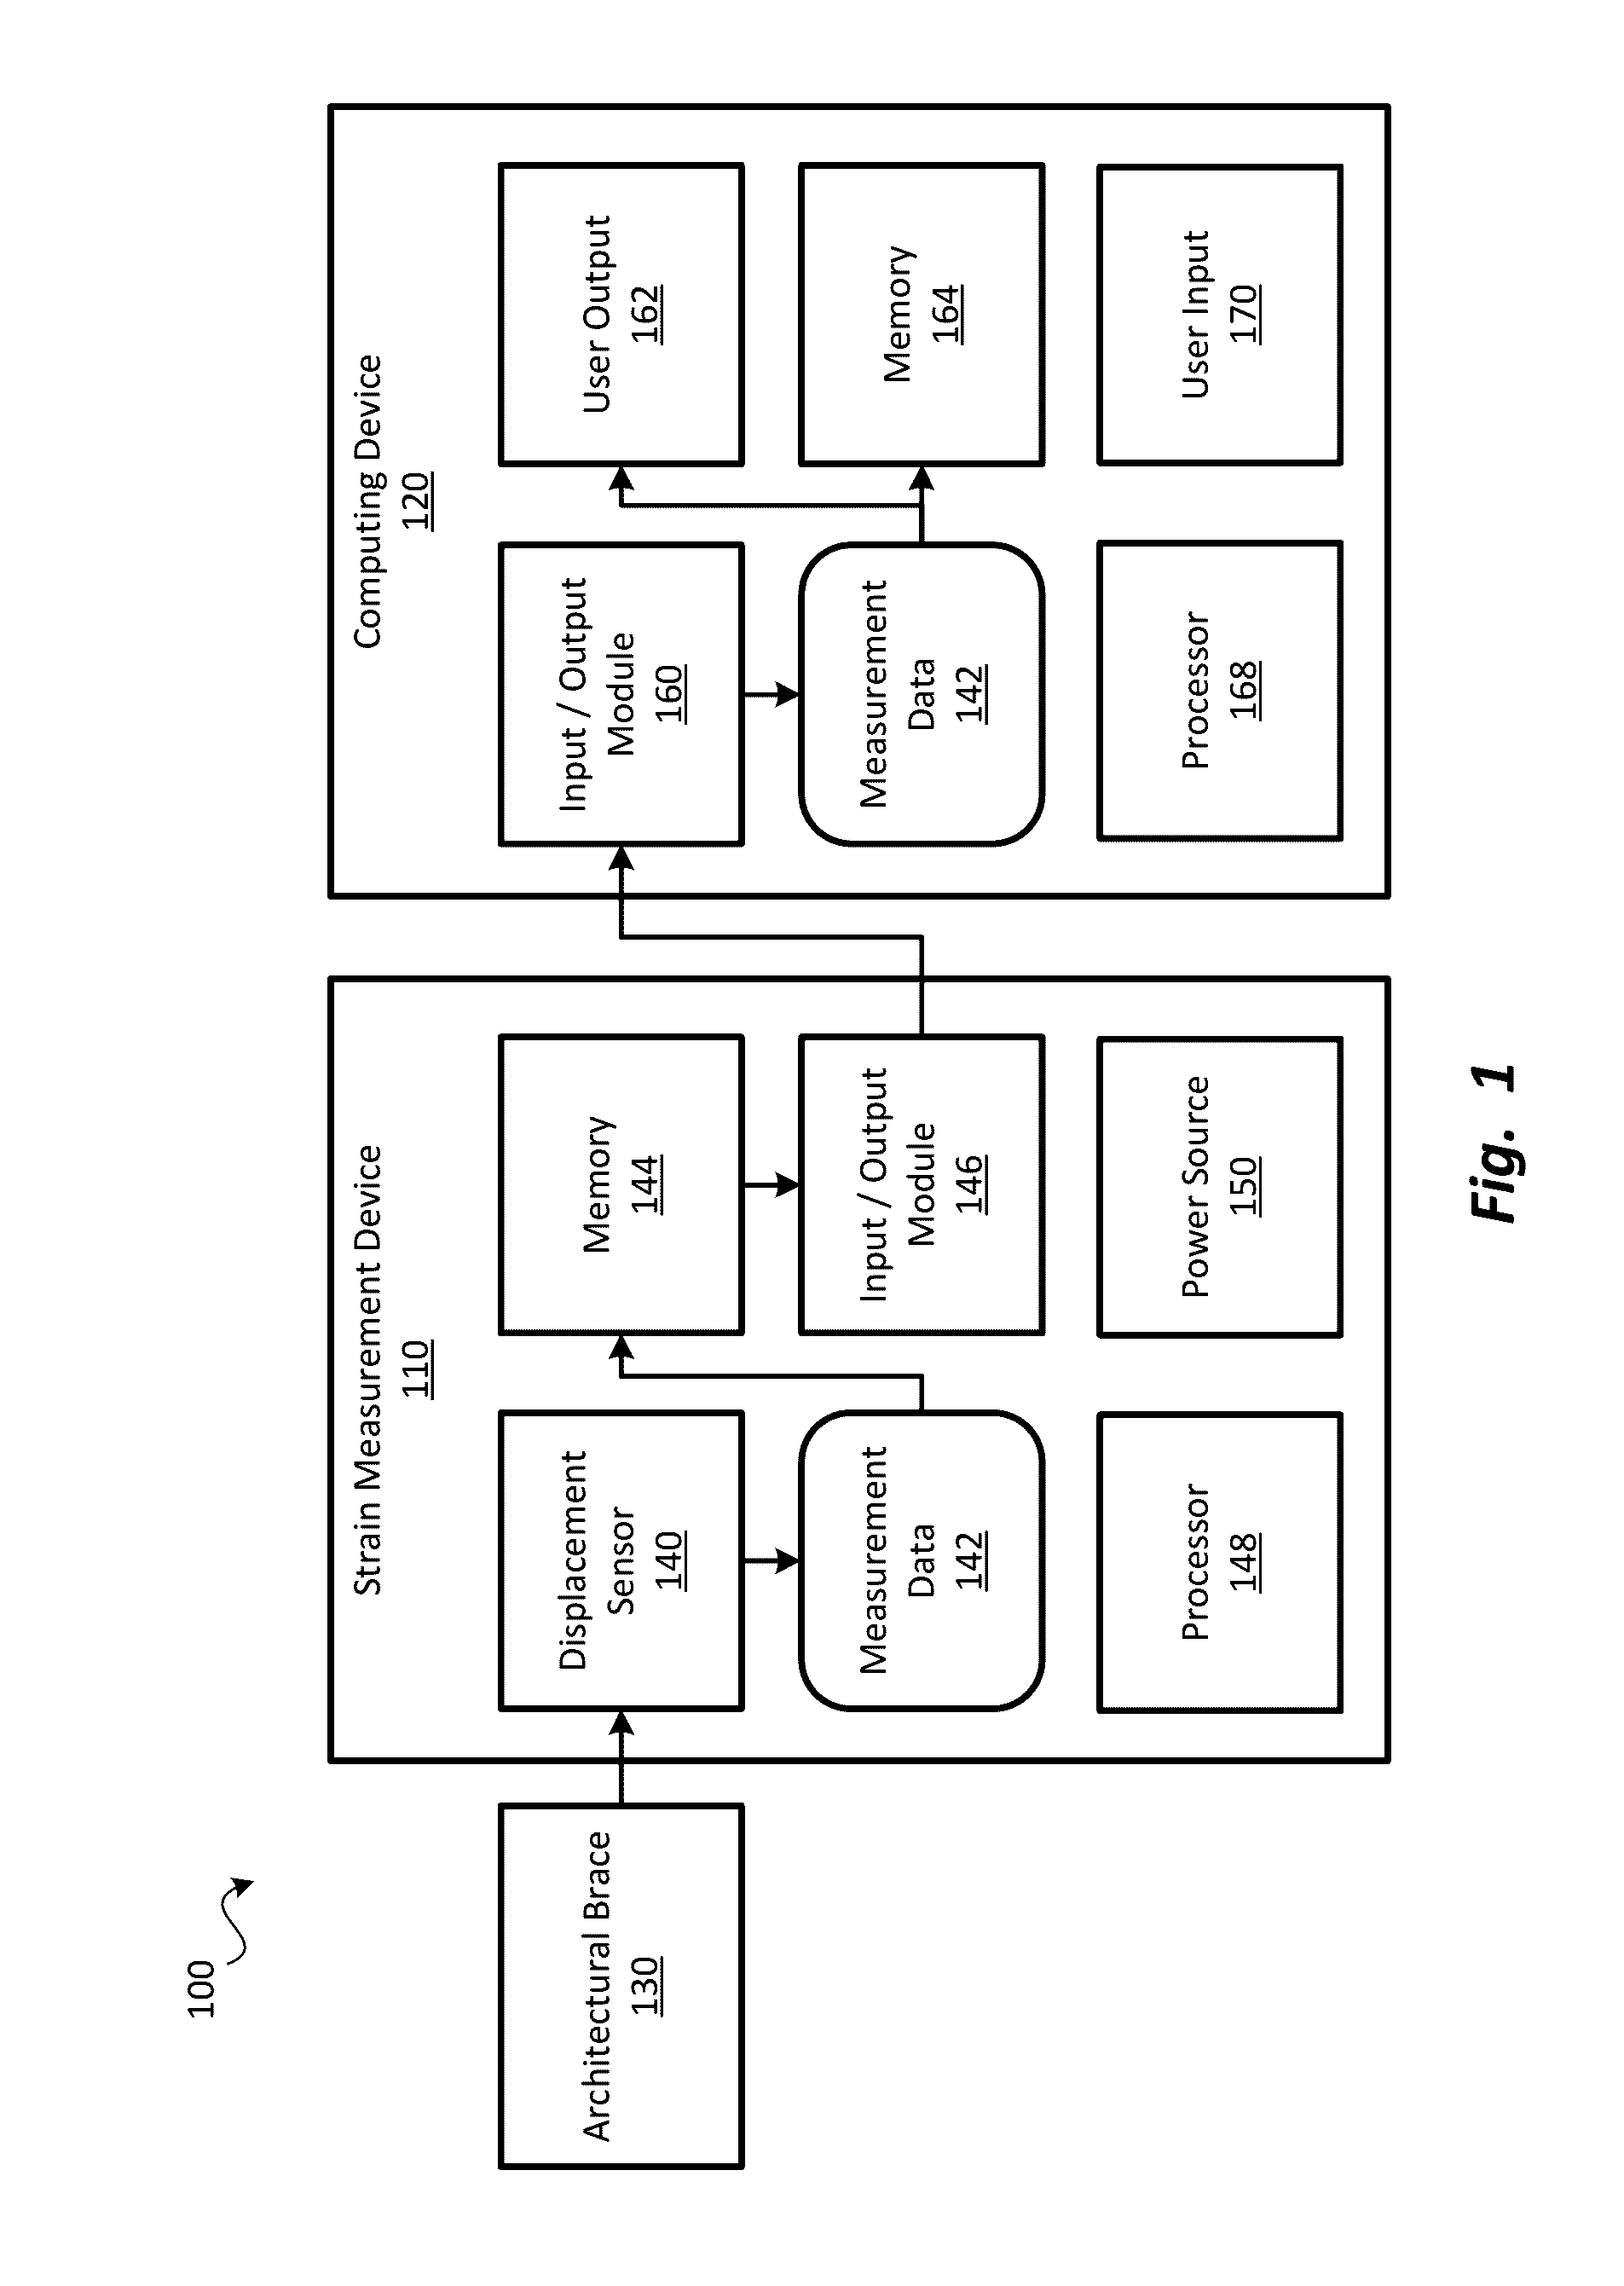 Displacement measurement systems and methods